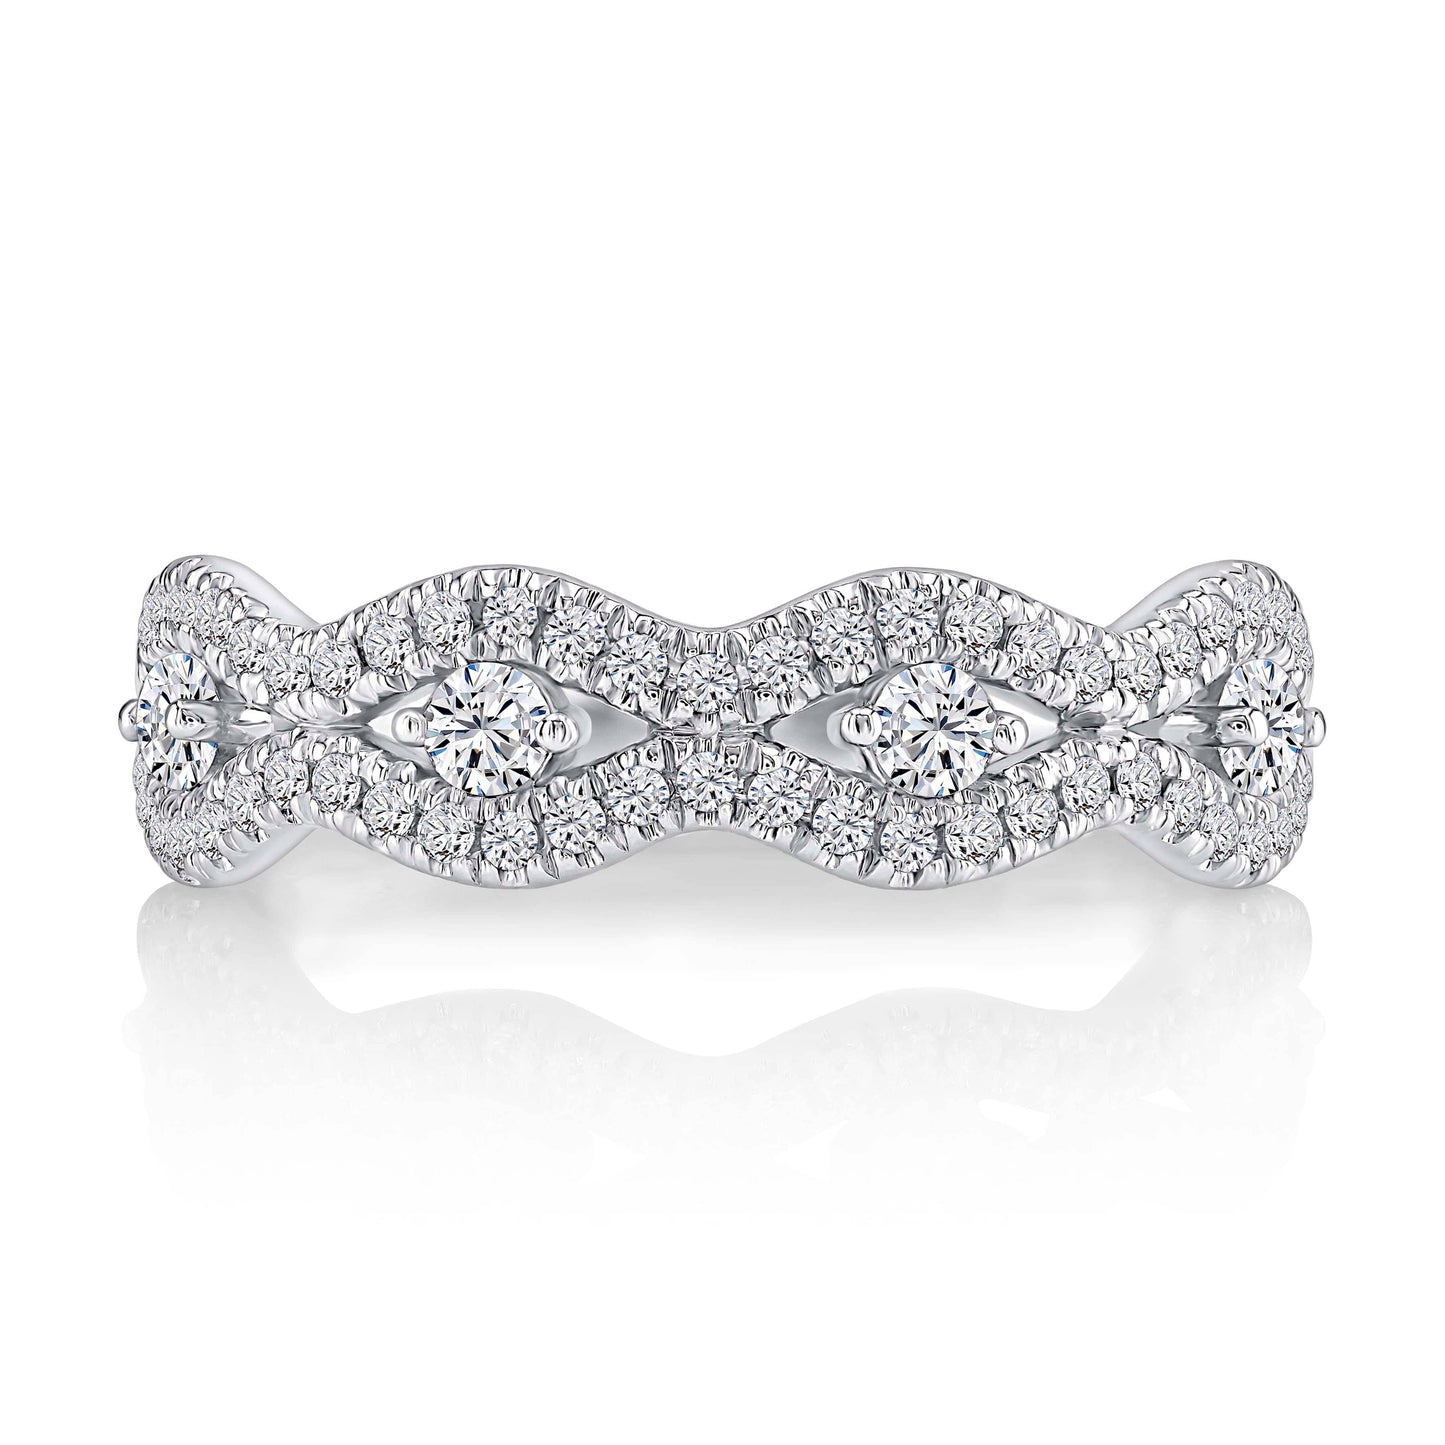 A. Jaffe Scalloped Edge Wedding Band in 14K White Gold